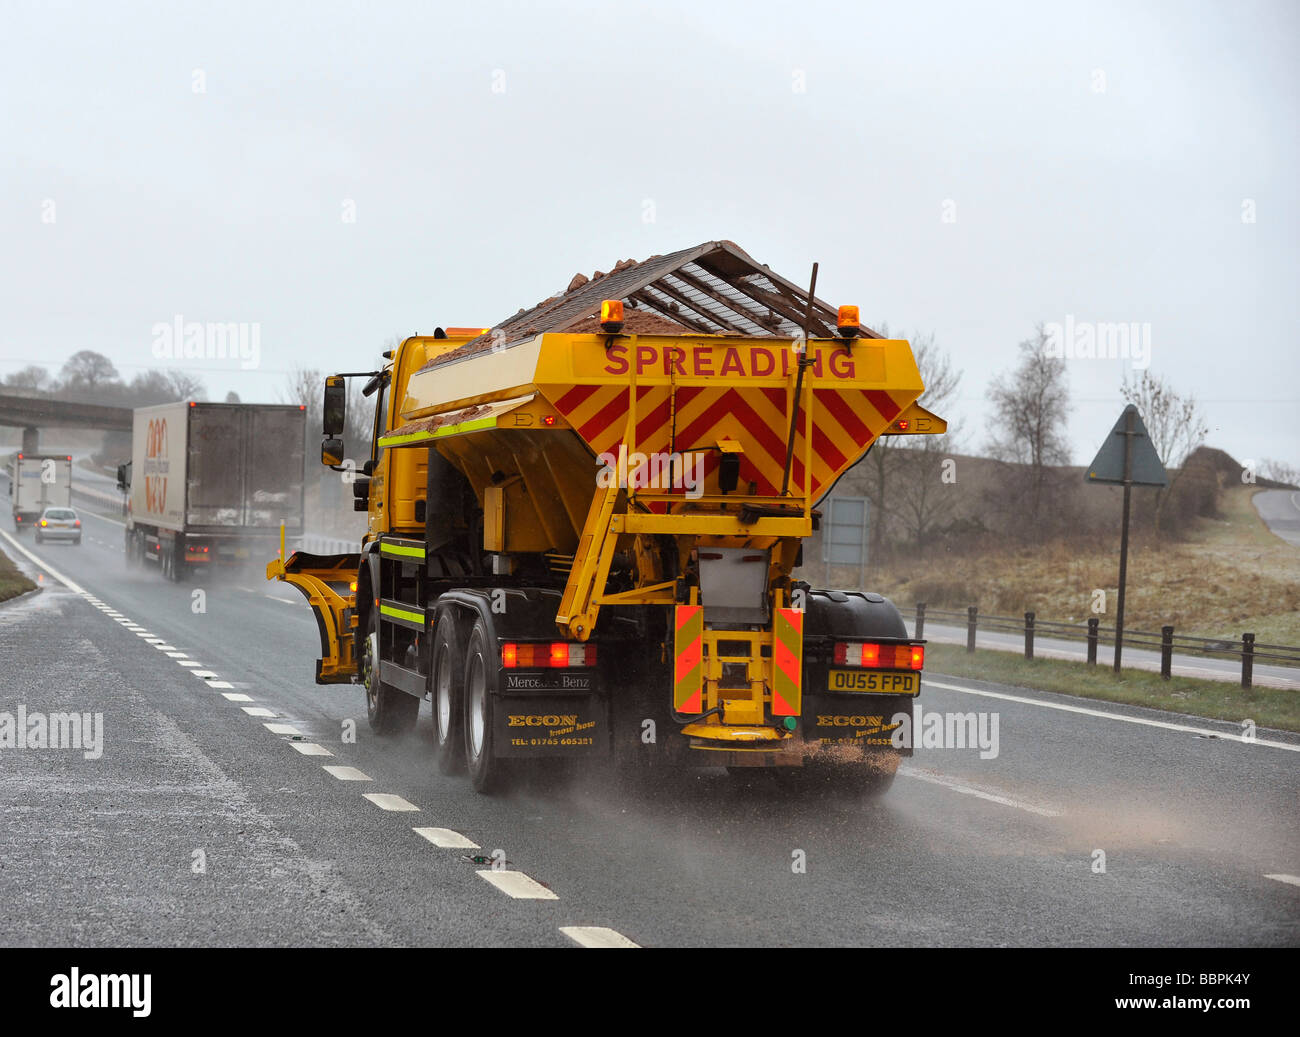 Mercedes gritting spreading gritter truck Stock Photo